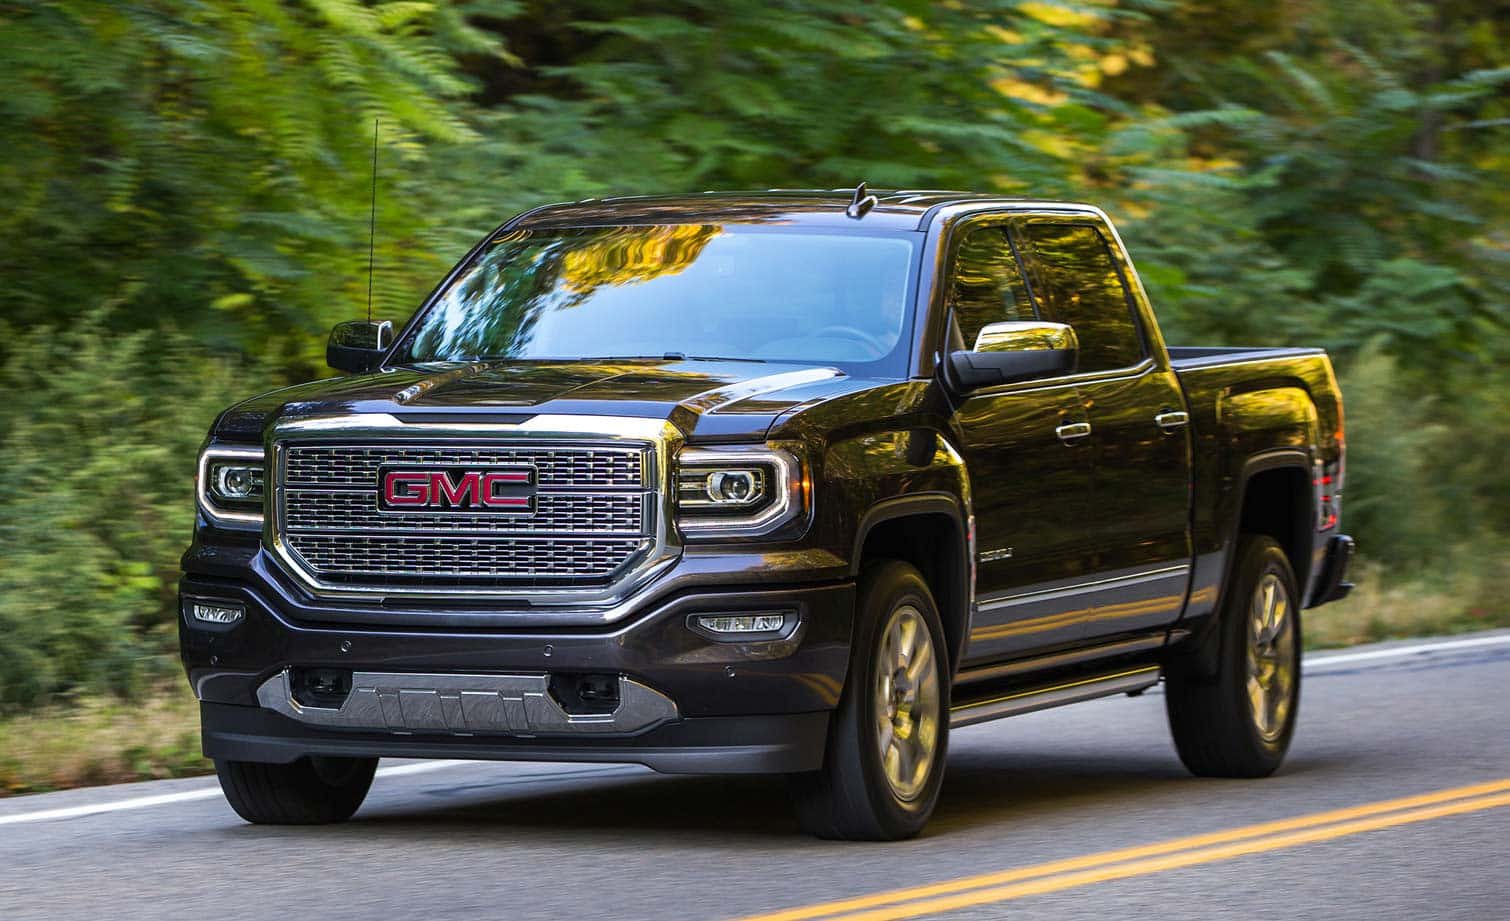 Gmc Pictures